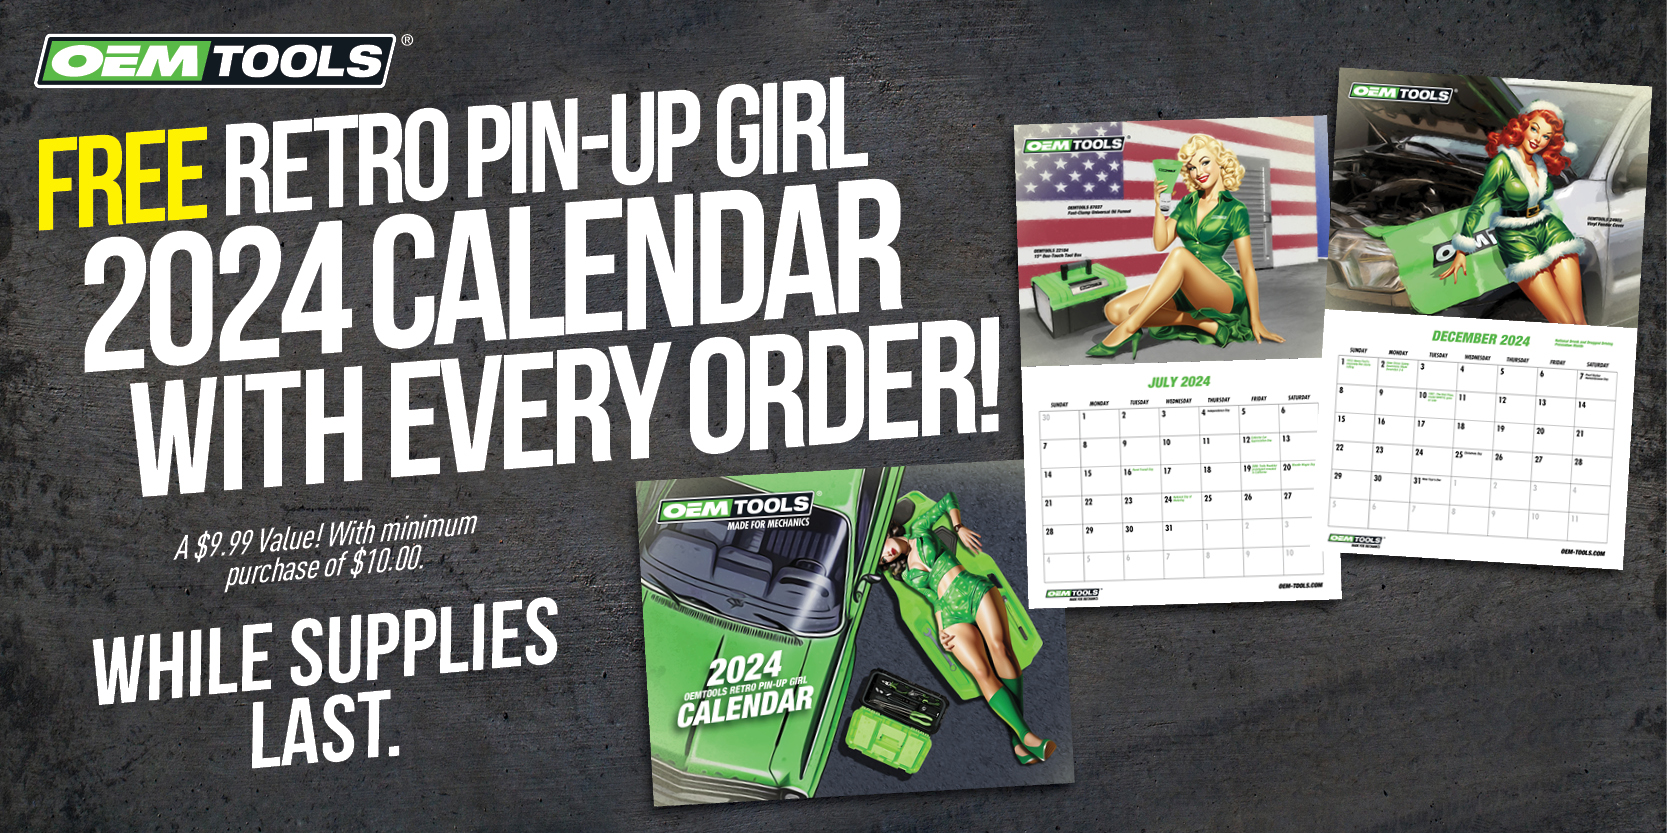 FREE Retro Pin-Up Girl 2024 Calendar with every order! Minimum purchase of $10